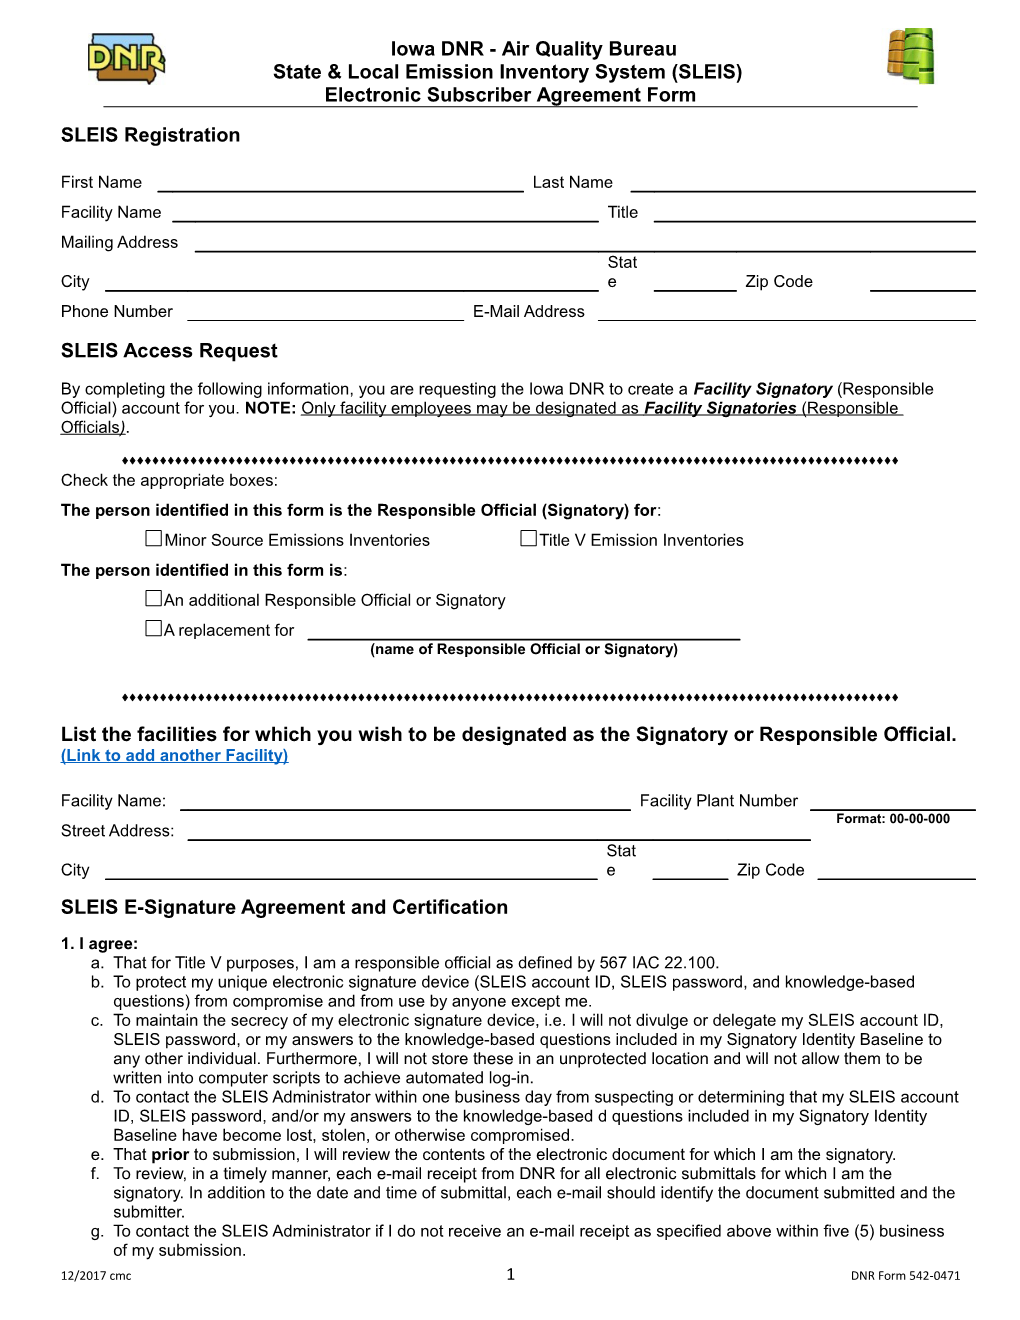 SLEIS Electronic Subscriber Agreement Form